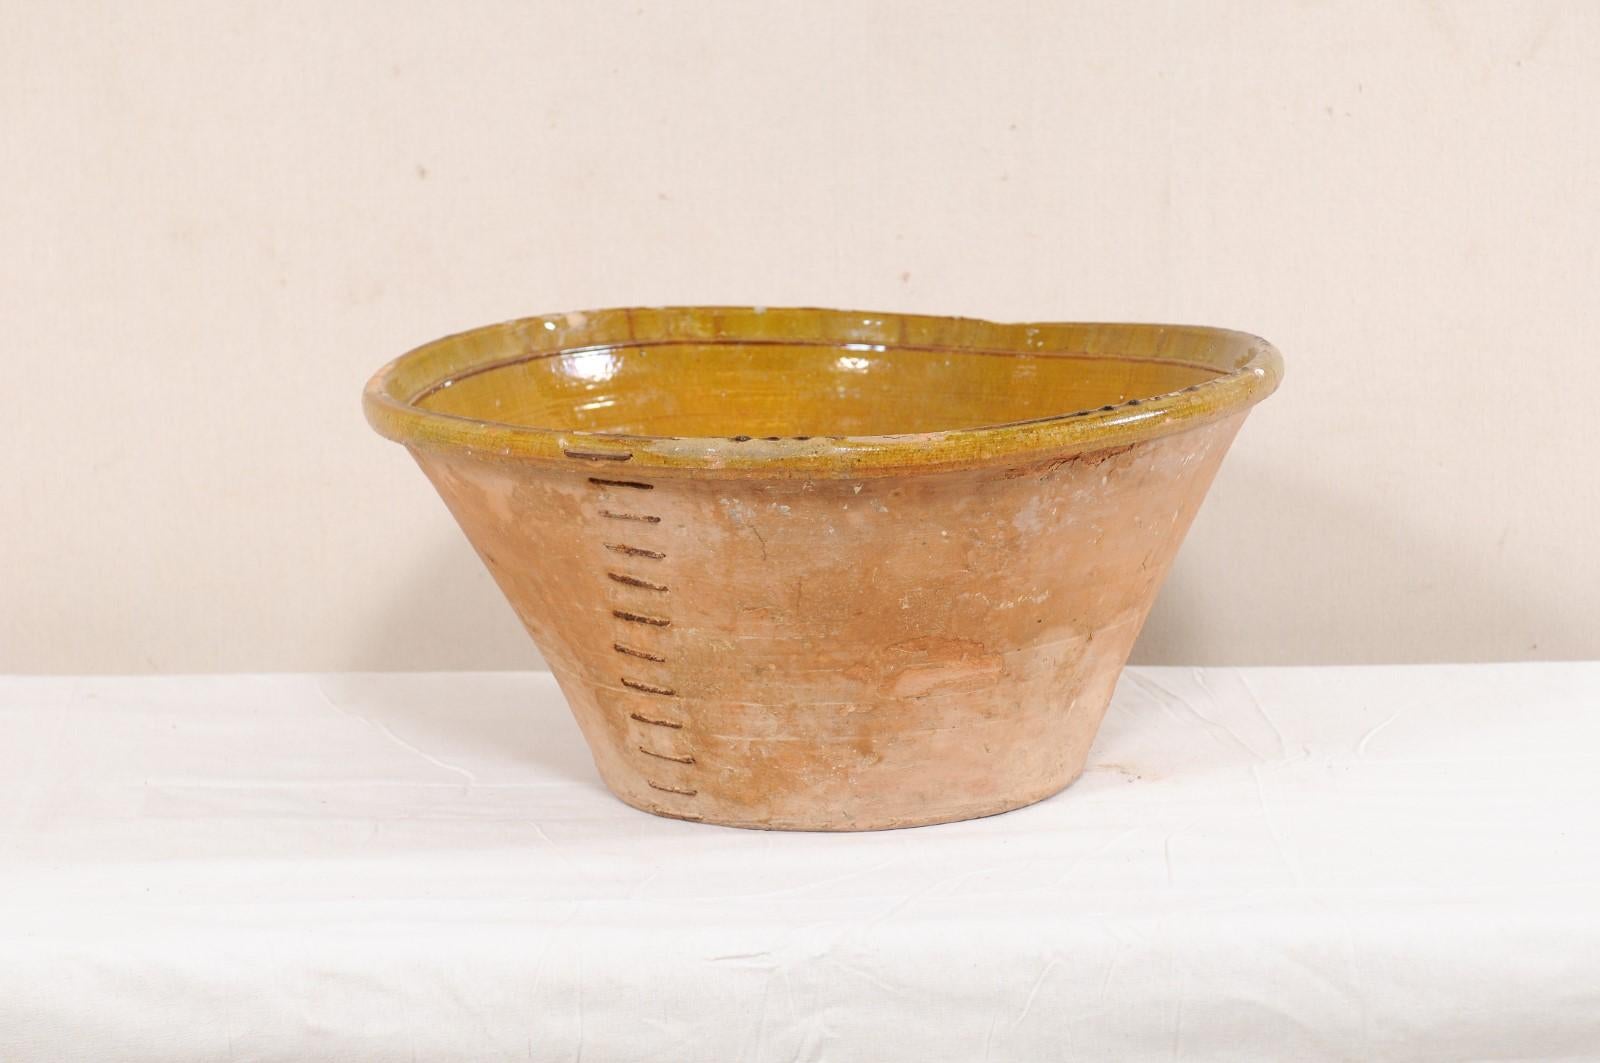 20th Century Spanish Terracotta Bowl w/ Muted Yellow & Pale Green Inner Glaze and Old Mending